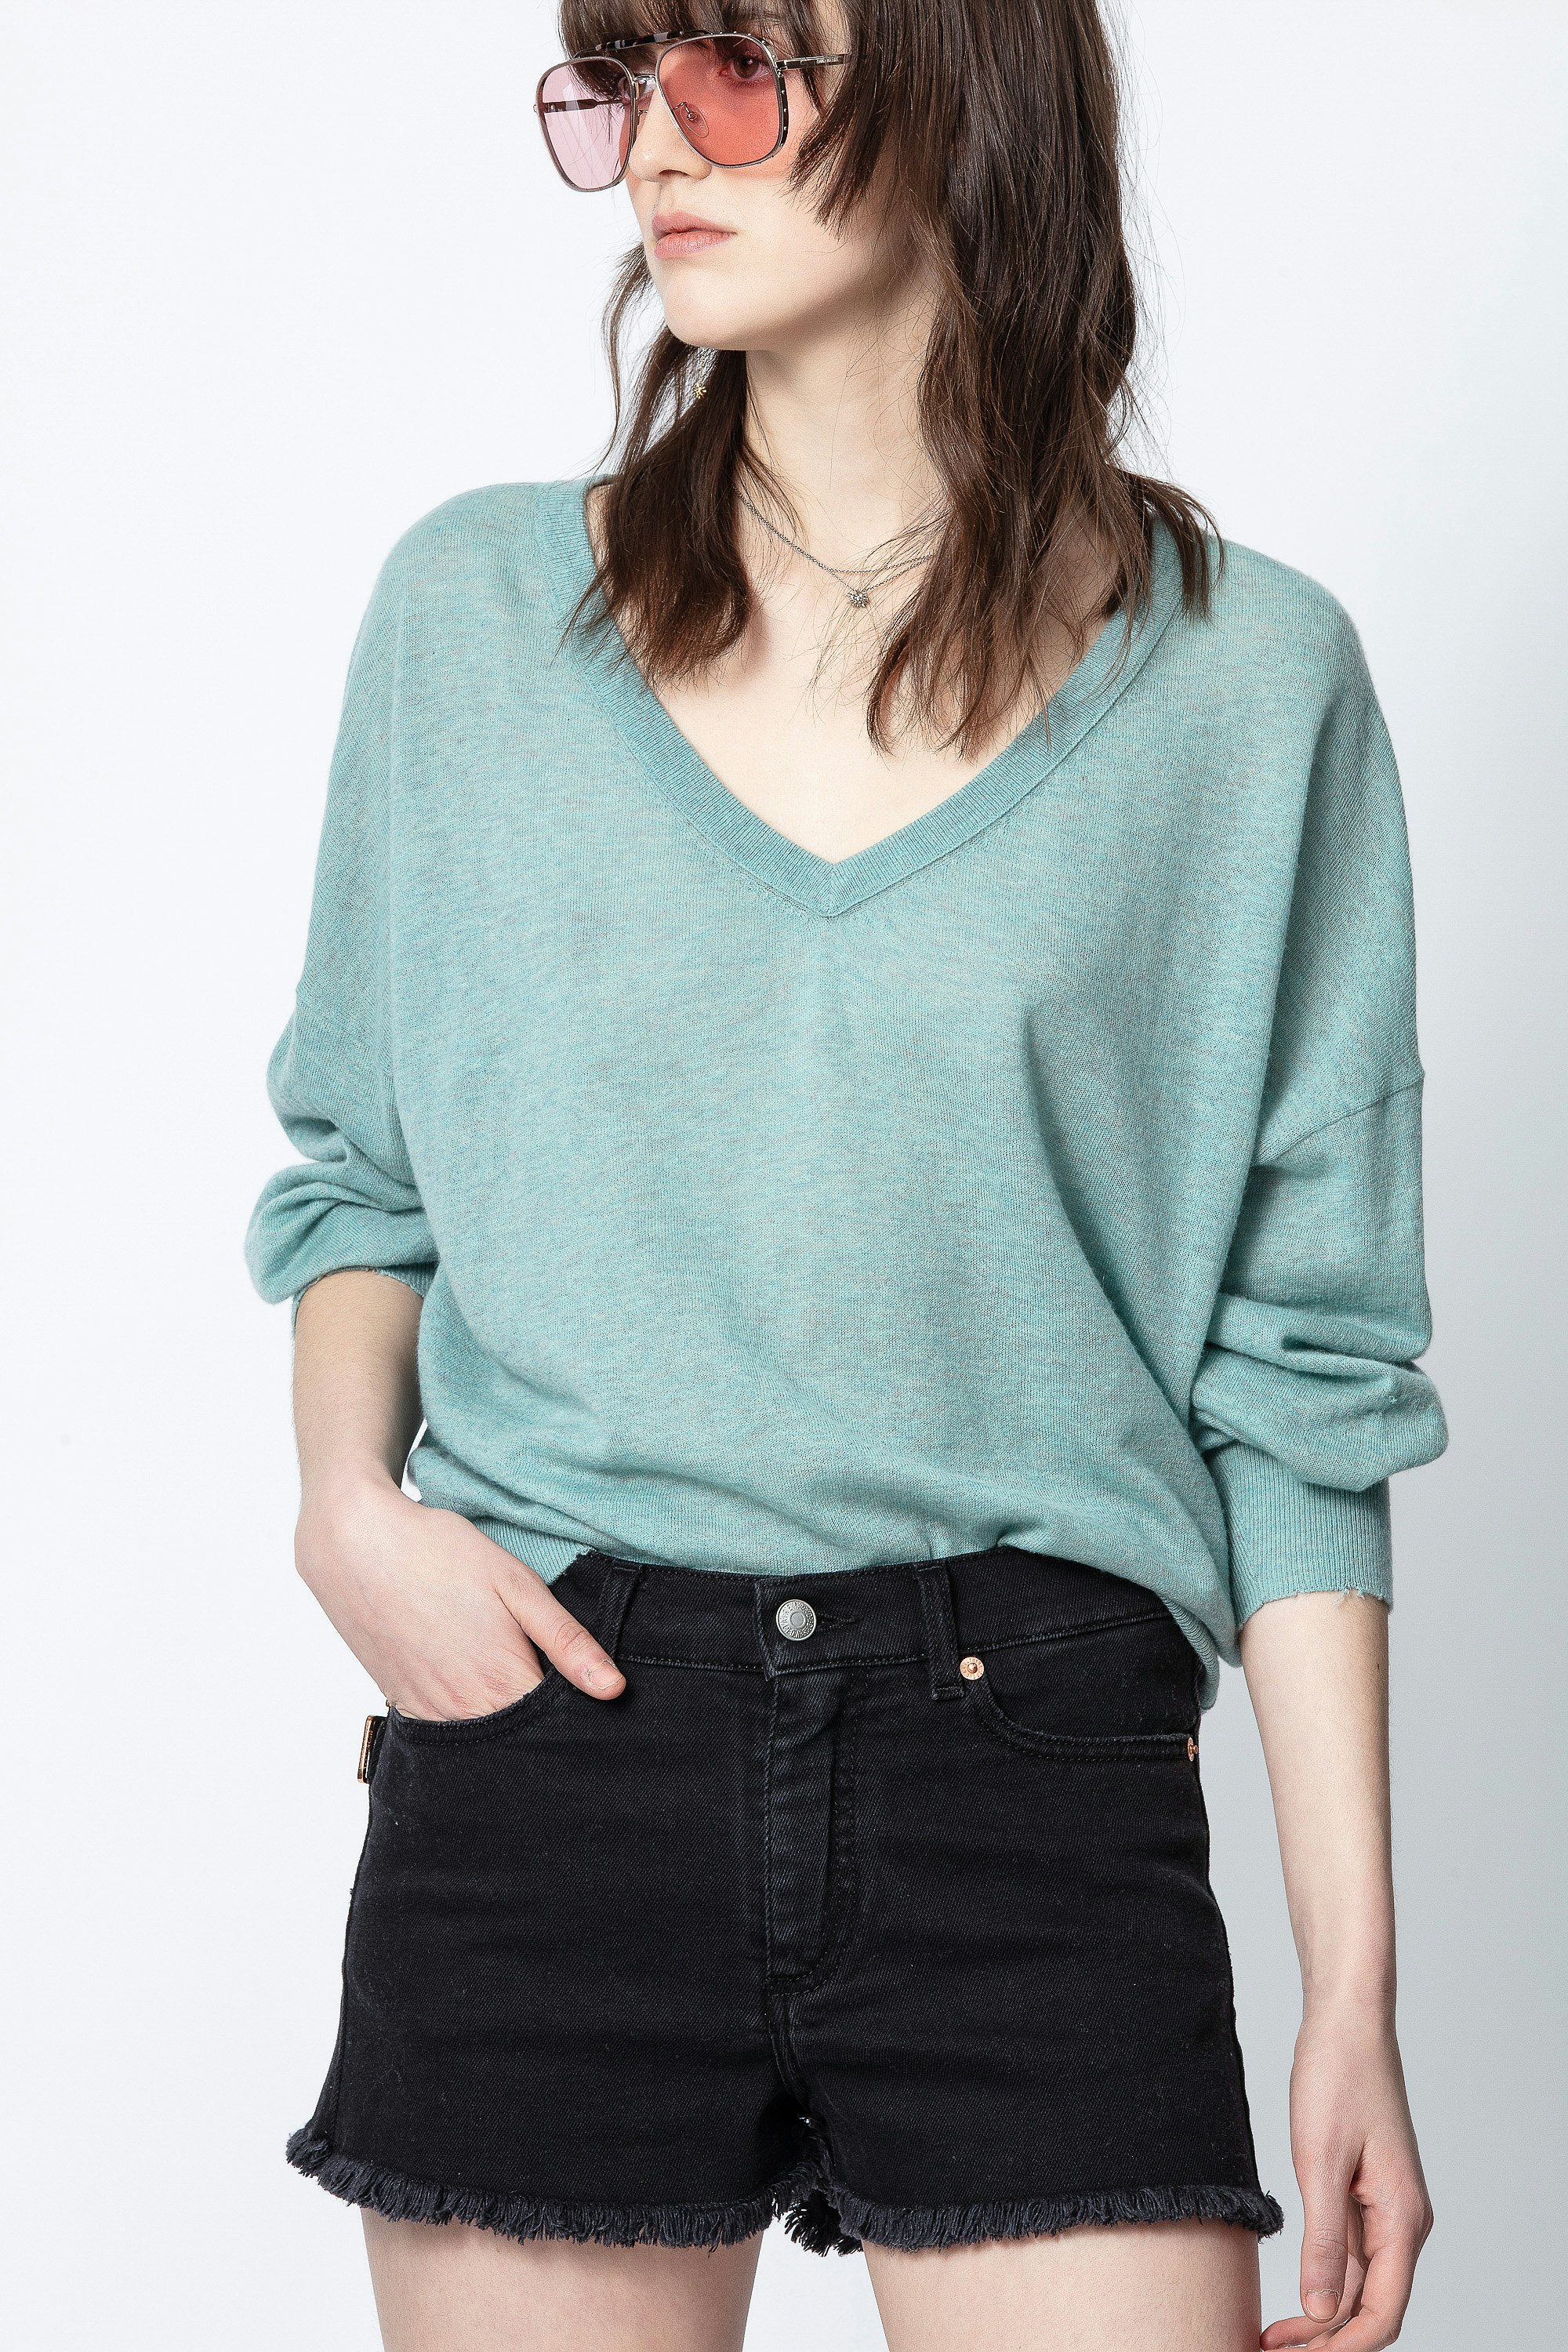 Buy > teal cashmere sweater > in stock